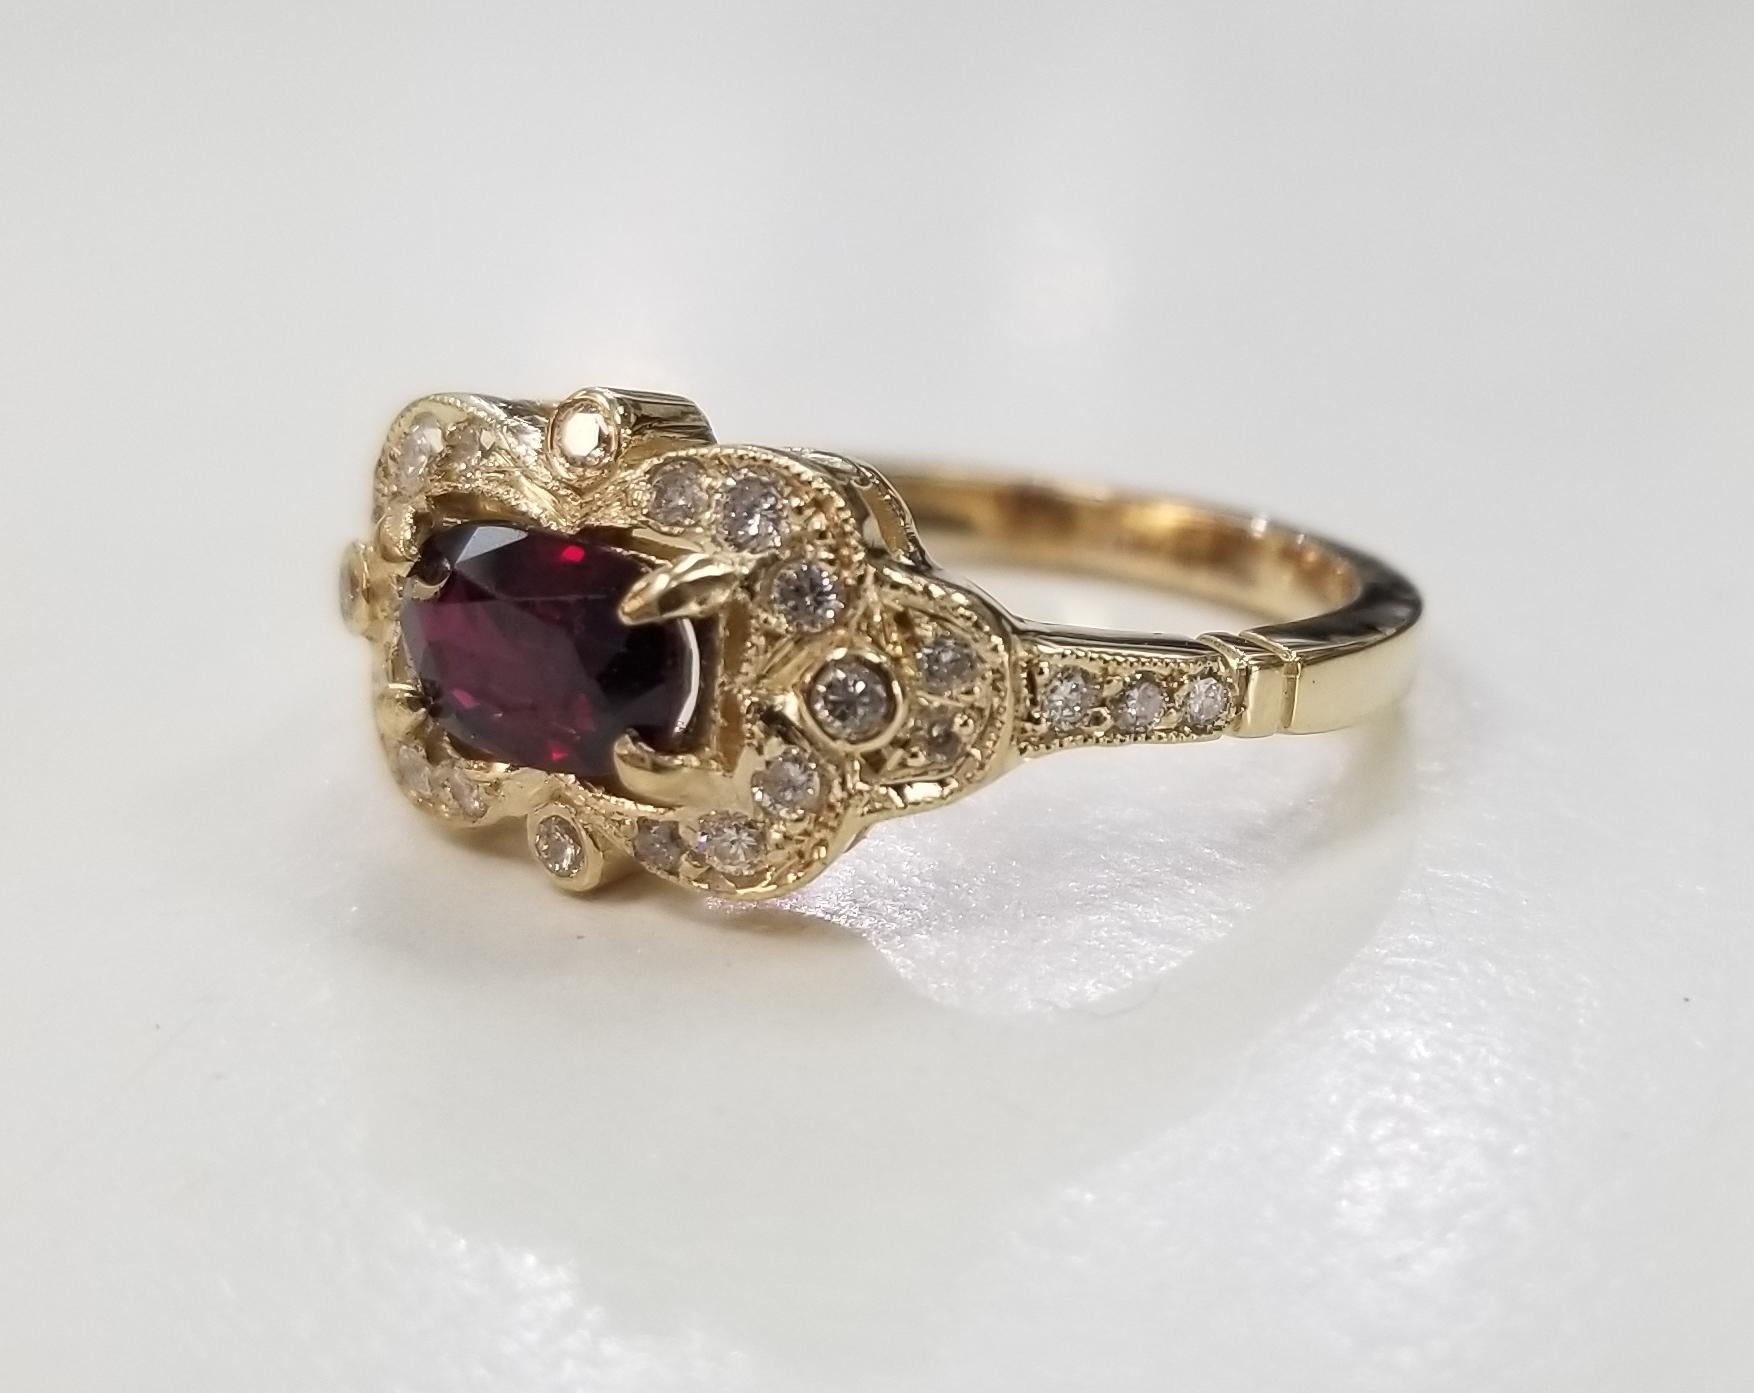 14 karat Art Deco Style Ruby and diamond ring, containing 1 step GIA Certified cut ruby weighing .83pts. and 26 round full cut diamonds of very fine quality weighing .27pts. This ring is a size 6.5 but we will size to fit for free.